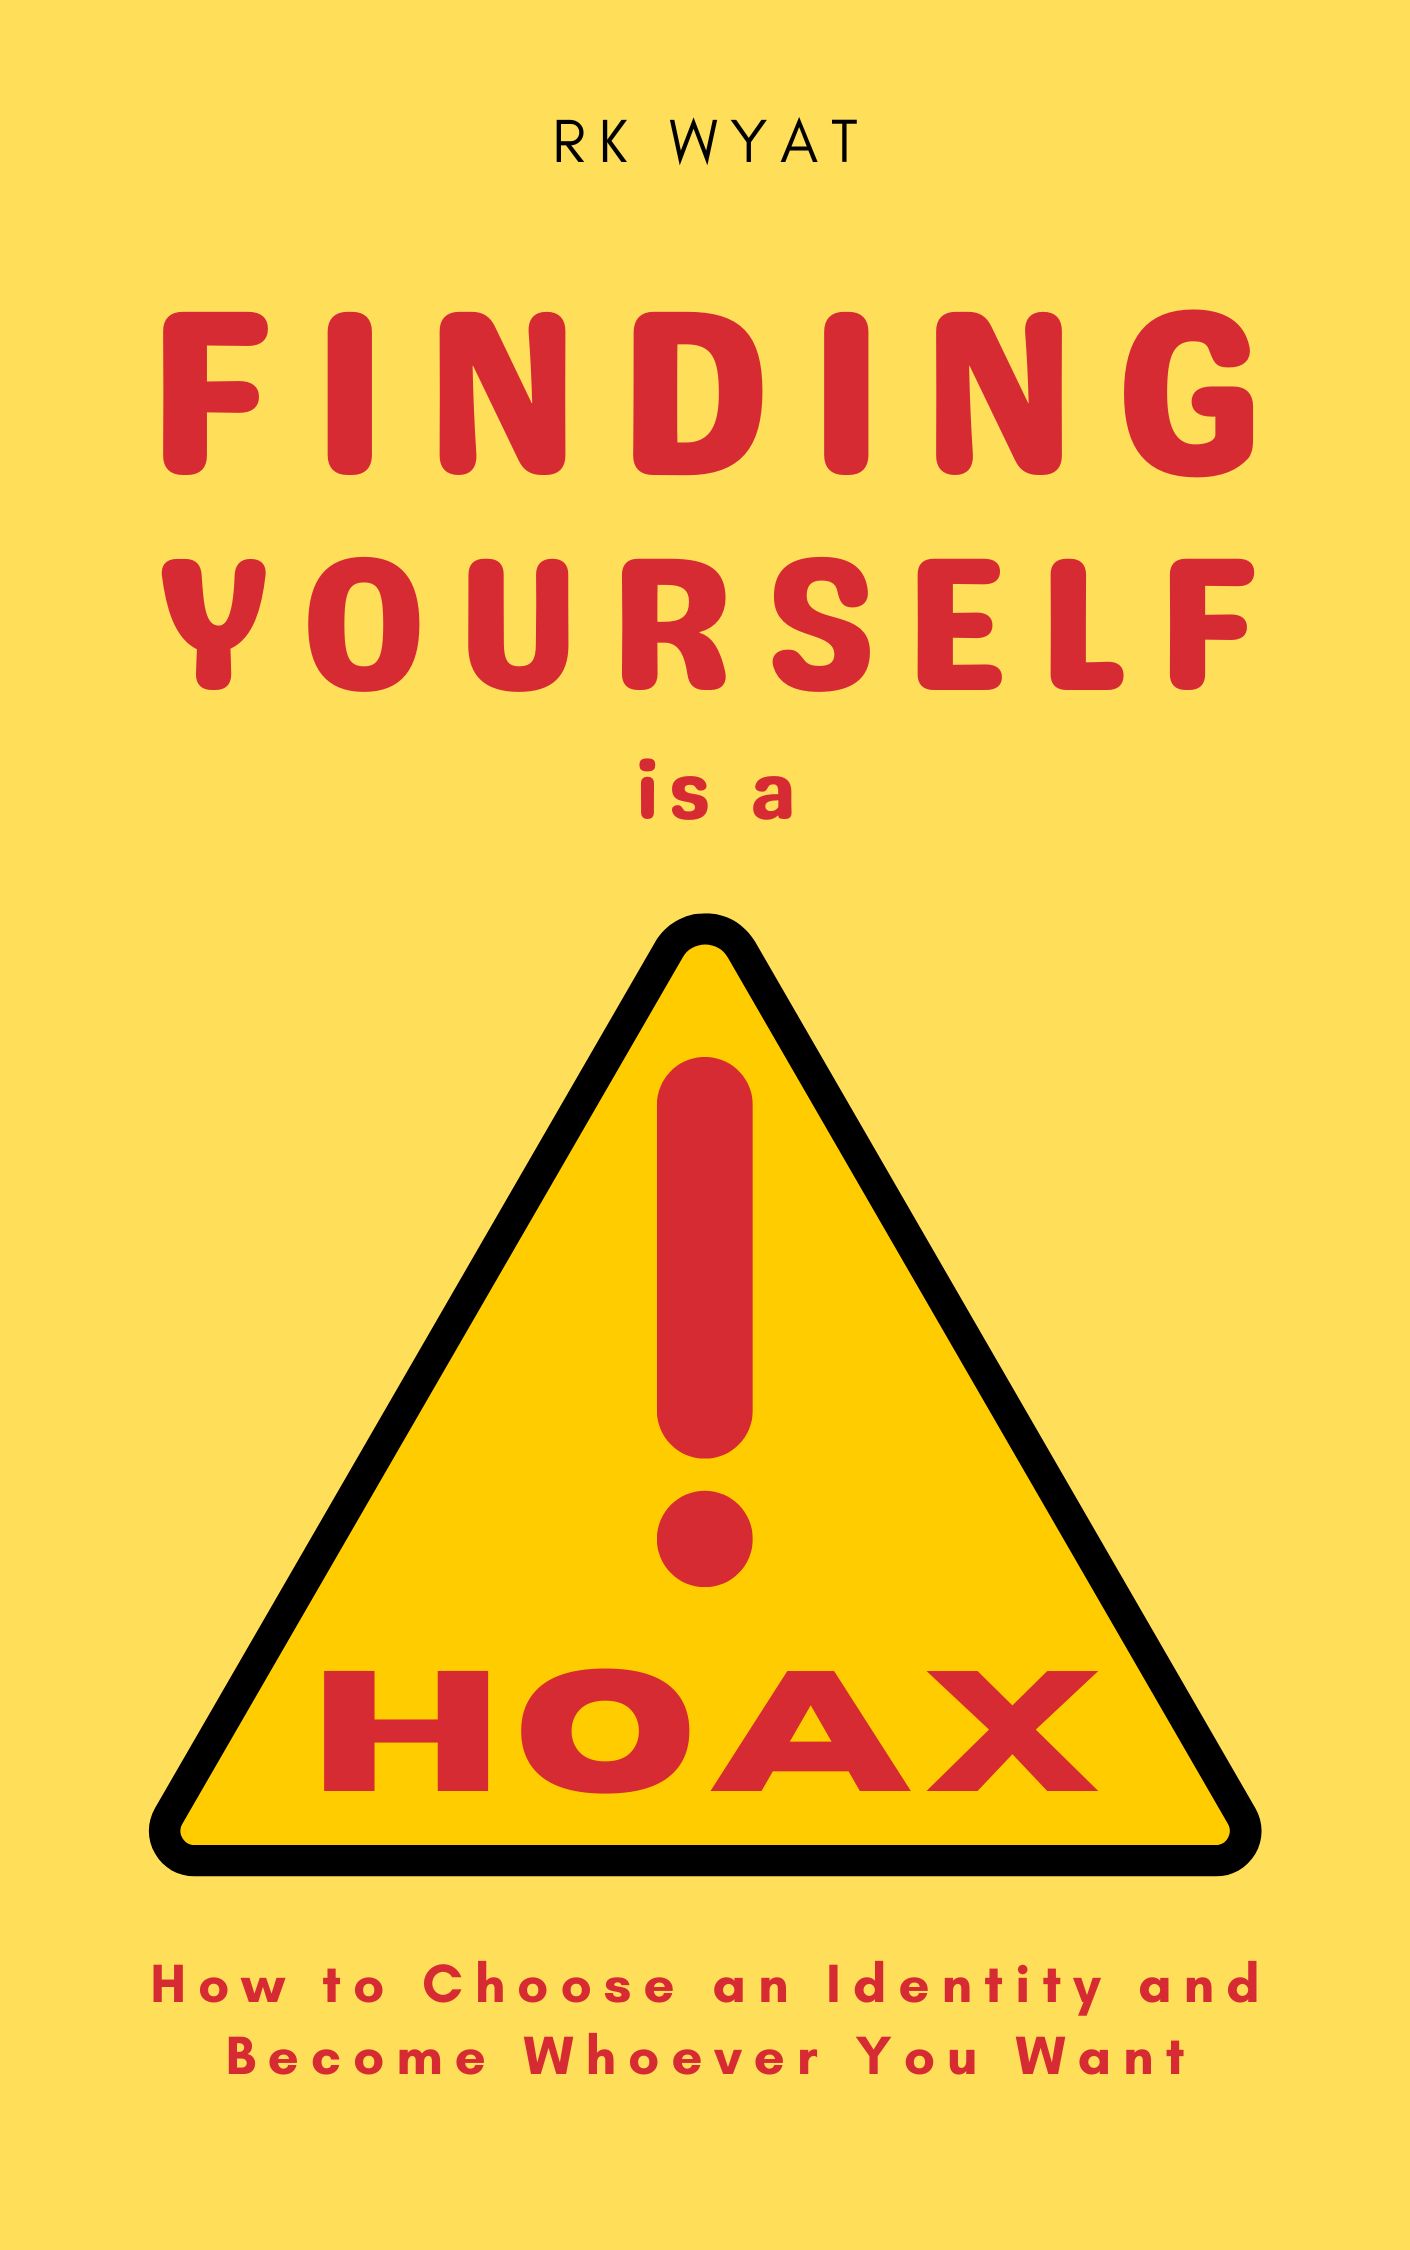 RK Wyat: Finding Yourself Is a Hoax